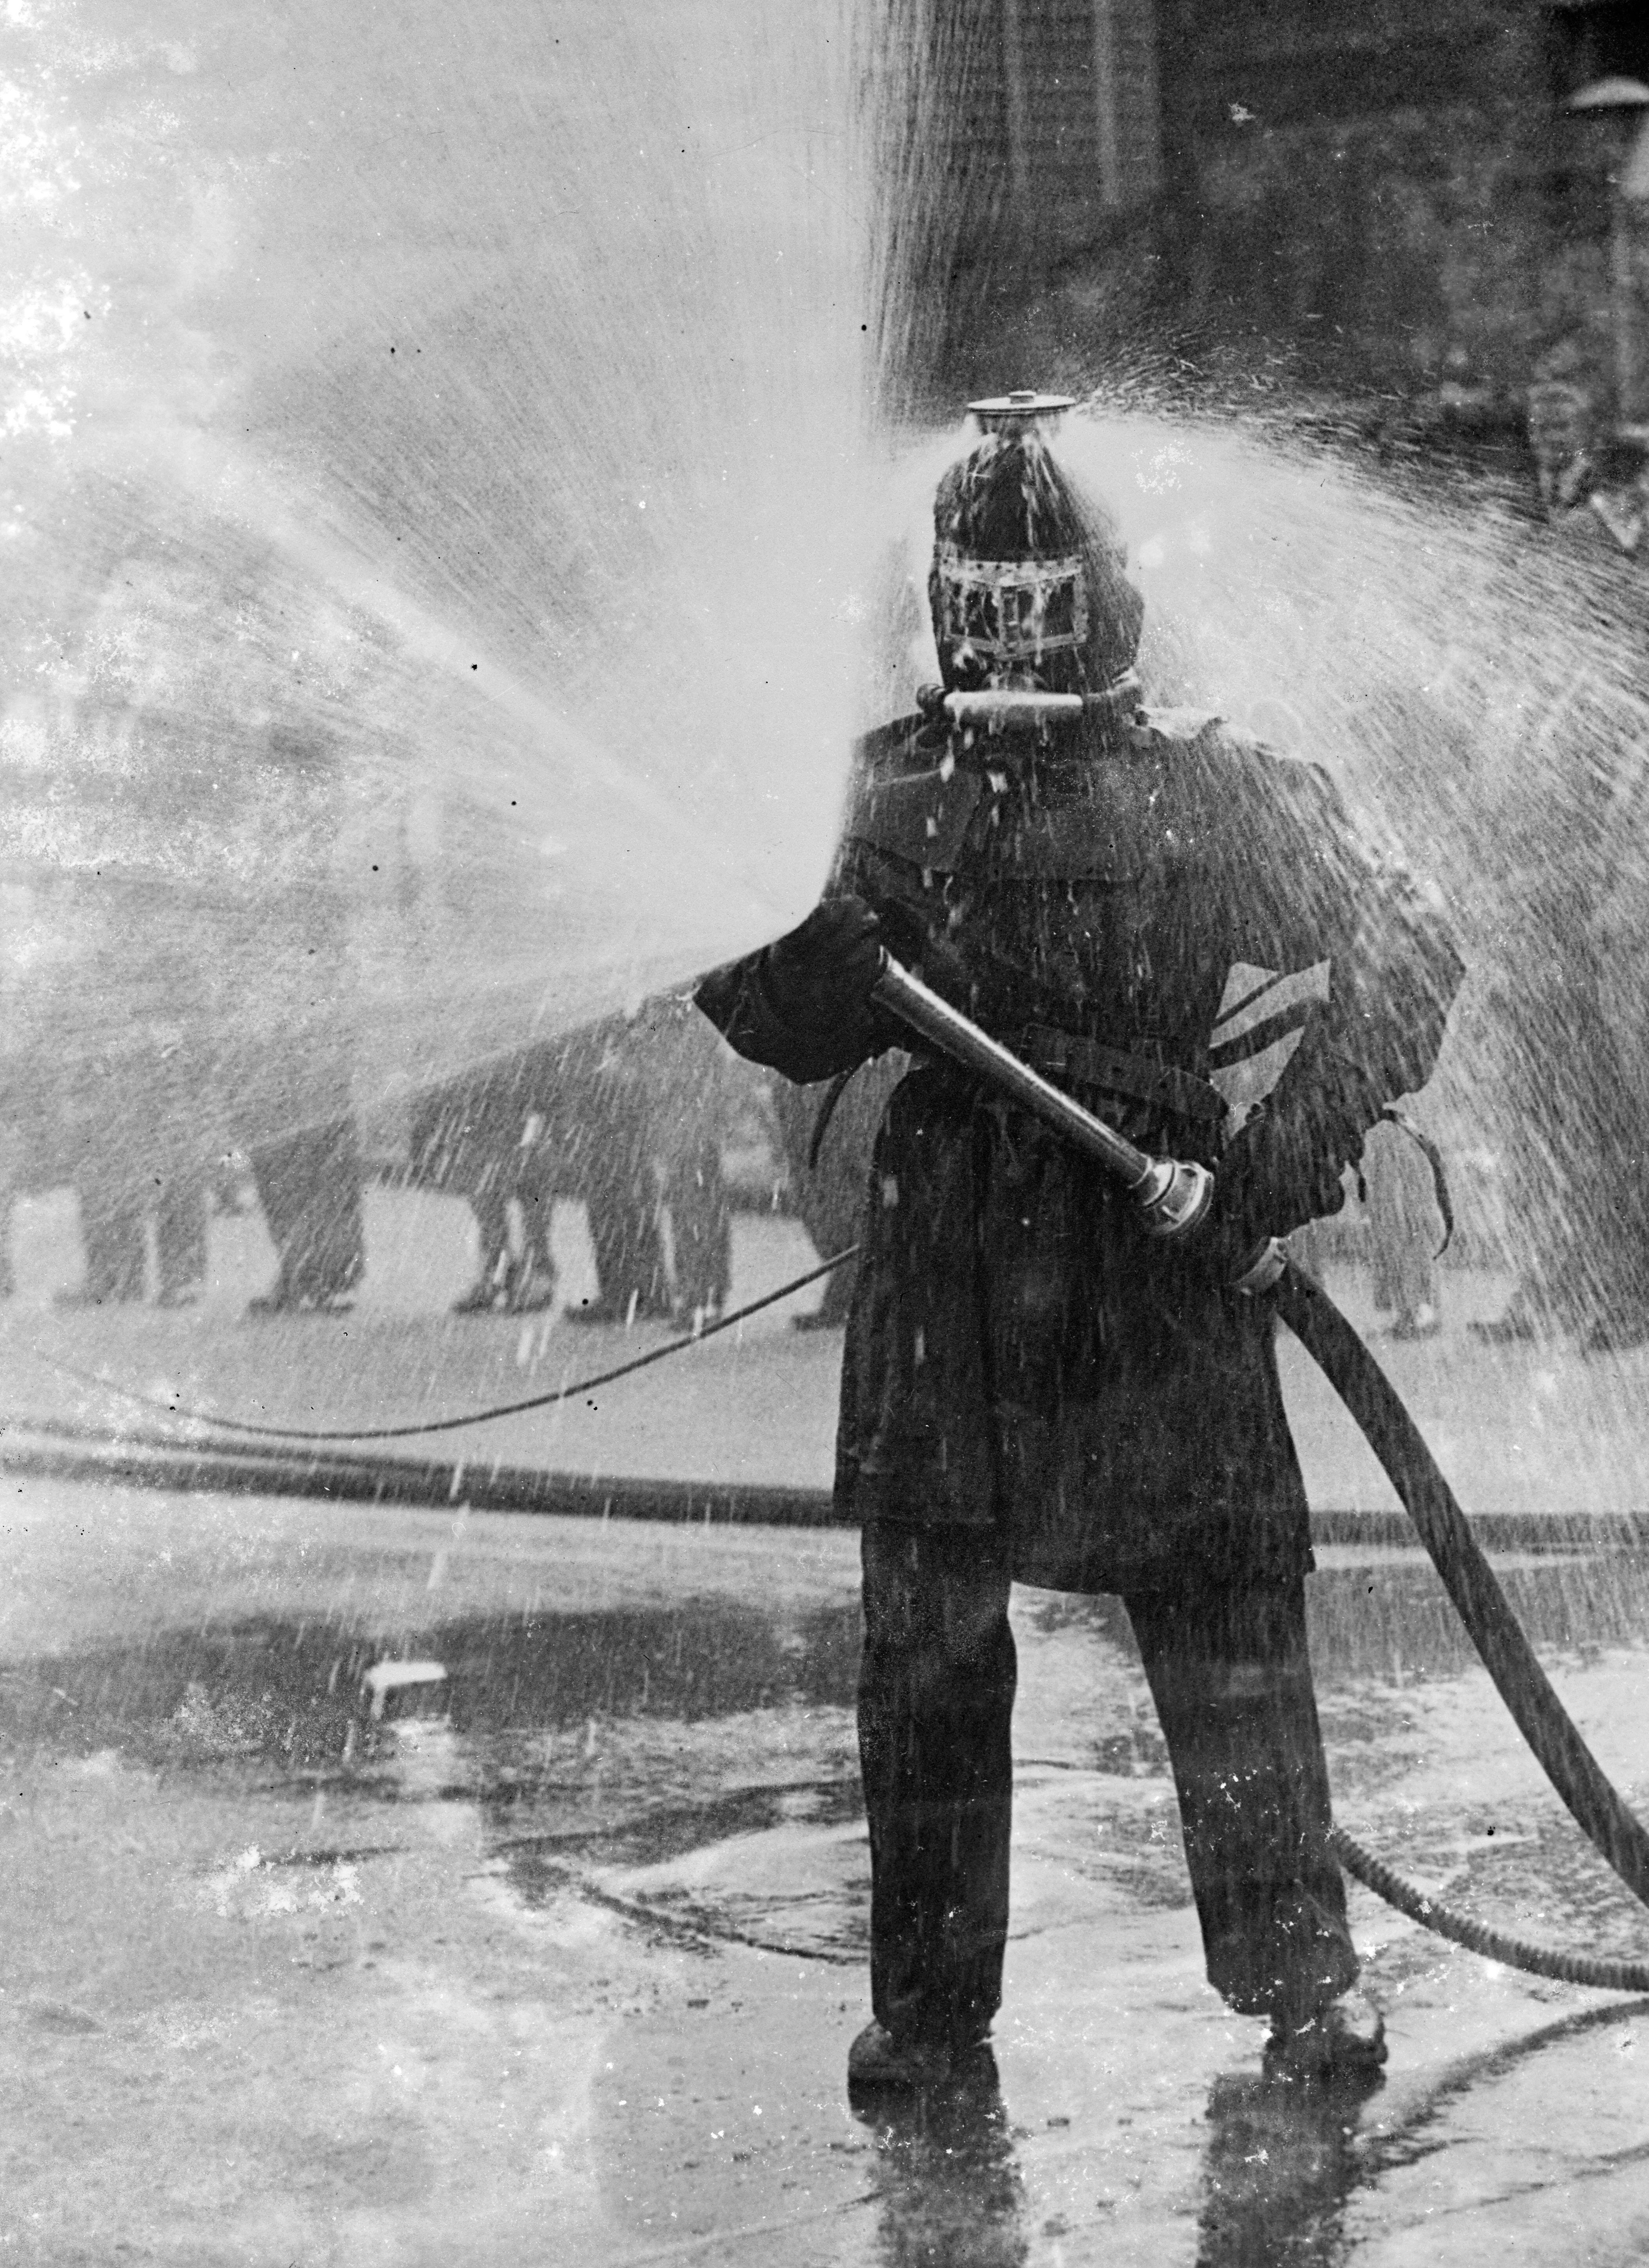 A water-filled firefighter suit